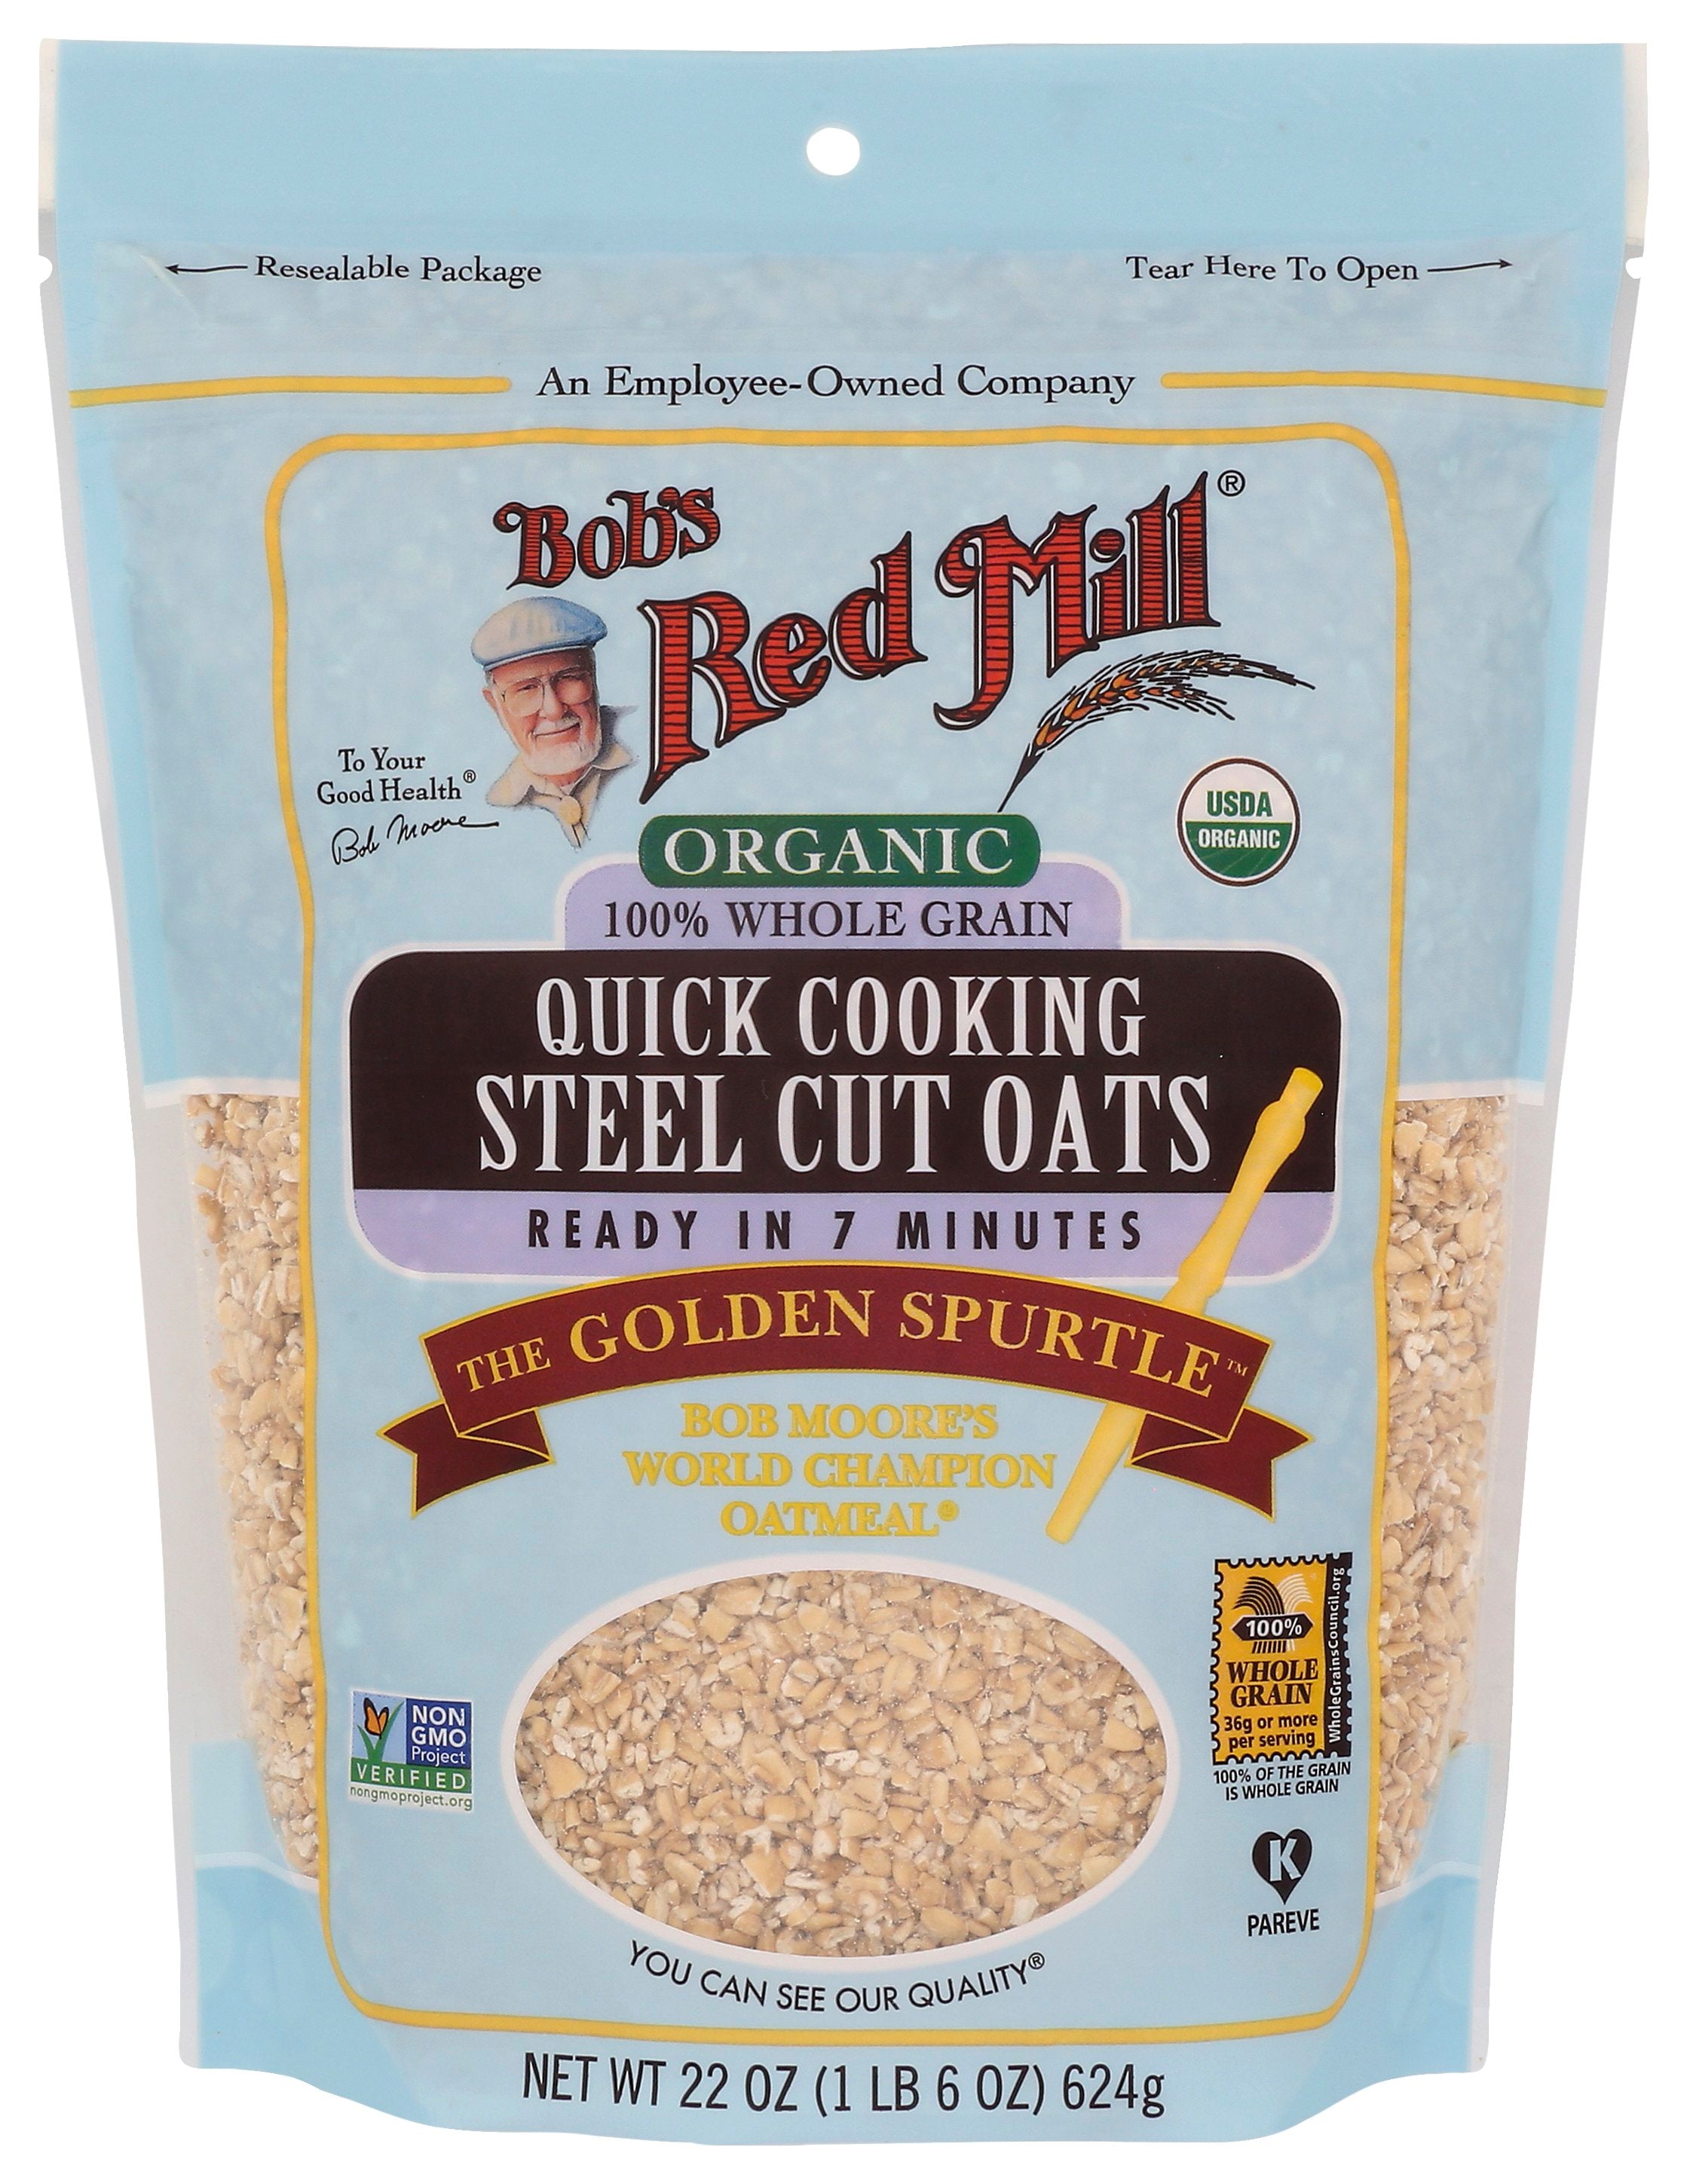 BOBS RED MILL OATS STEEL CT QCK CK ORG - Case of 4